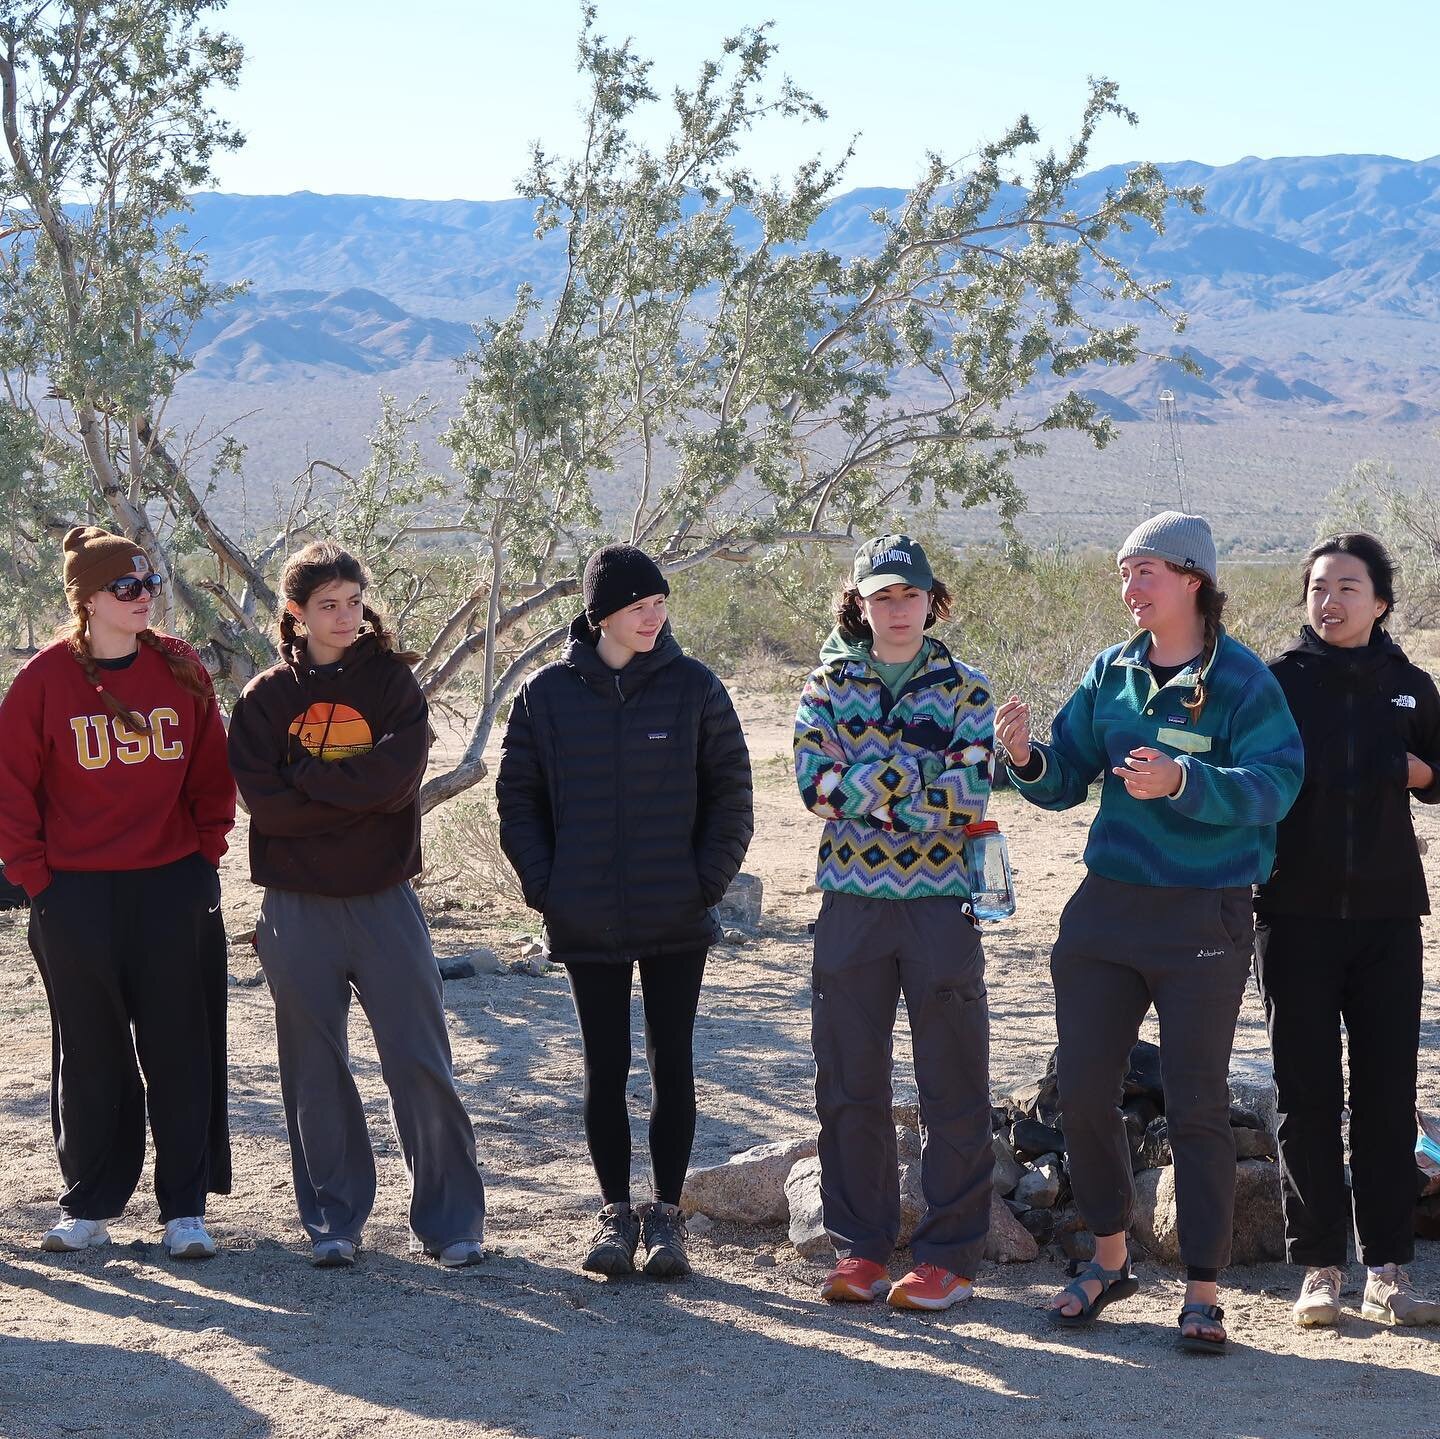 Friends 🥳. Food 🥘 . Fierce winds 💨. Fun in the desert 🏜️. Here&rsquo;s to another amazing basecamp! Huge congratulations to @s0f1ty_s0f_s0f and @ajilalala for winning the cooking competition with amazing burritos, chips &amp; salsa, and pie!

Als